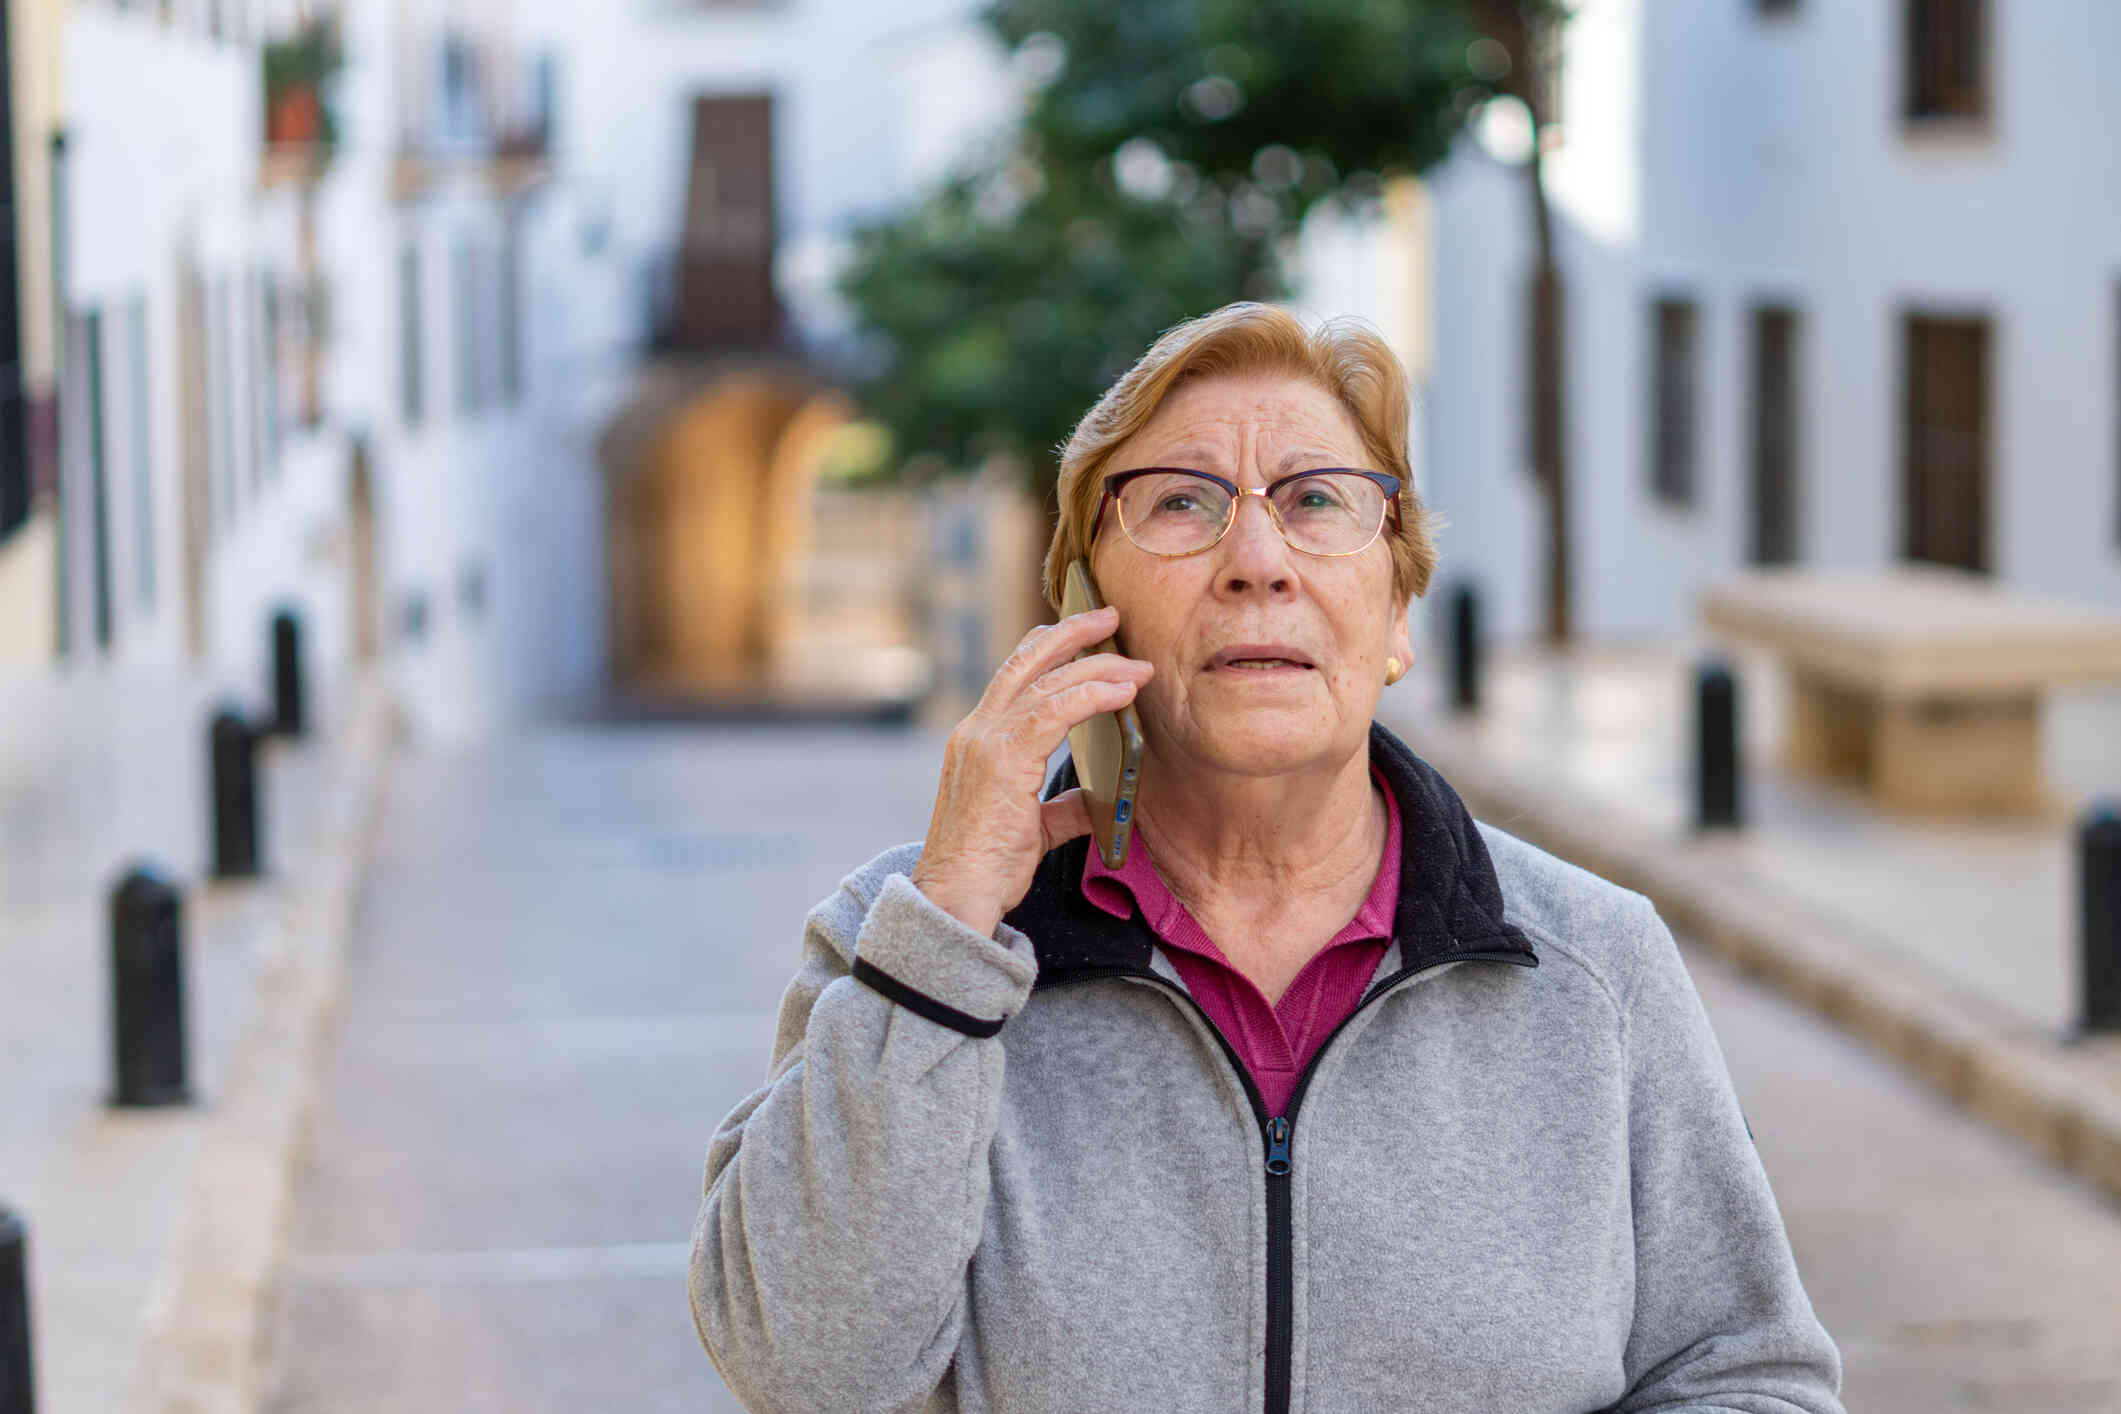 A mature woman in a grey hoodie walks outside on a coudy day and talks on the phone while staring off with a worried expression.